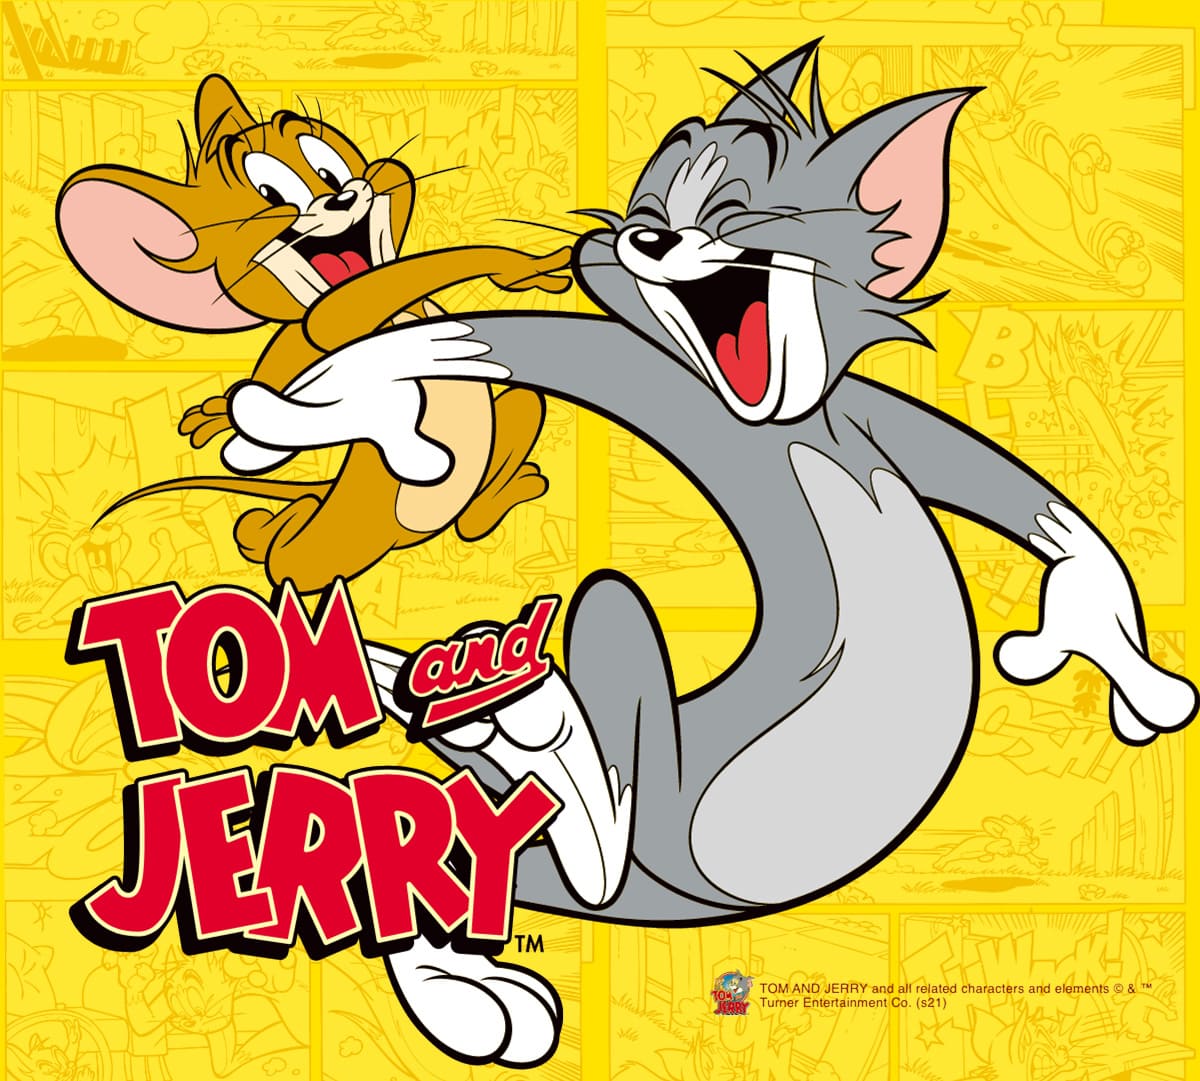 TOM and JERRY